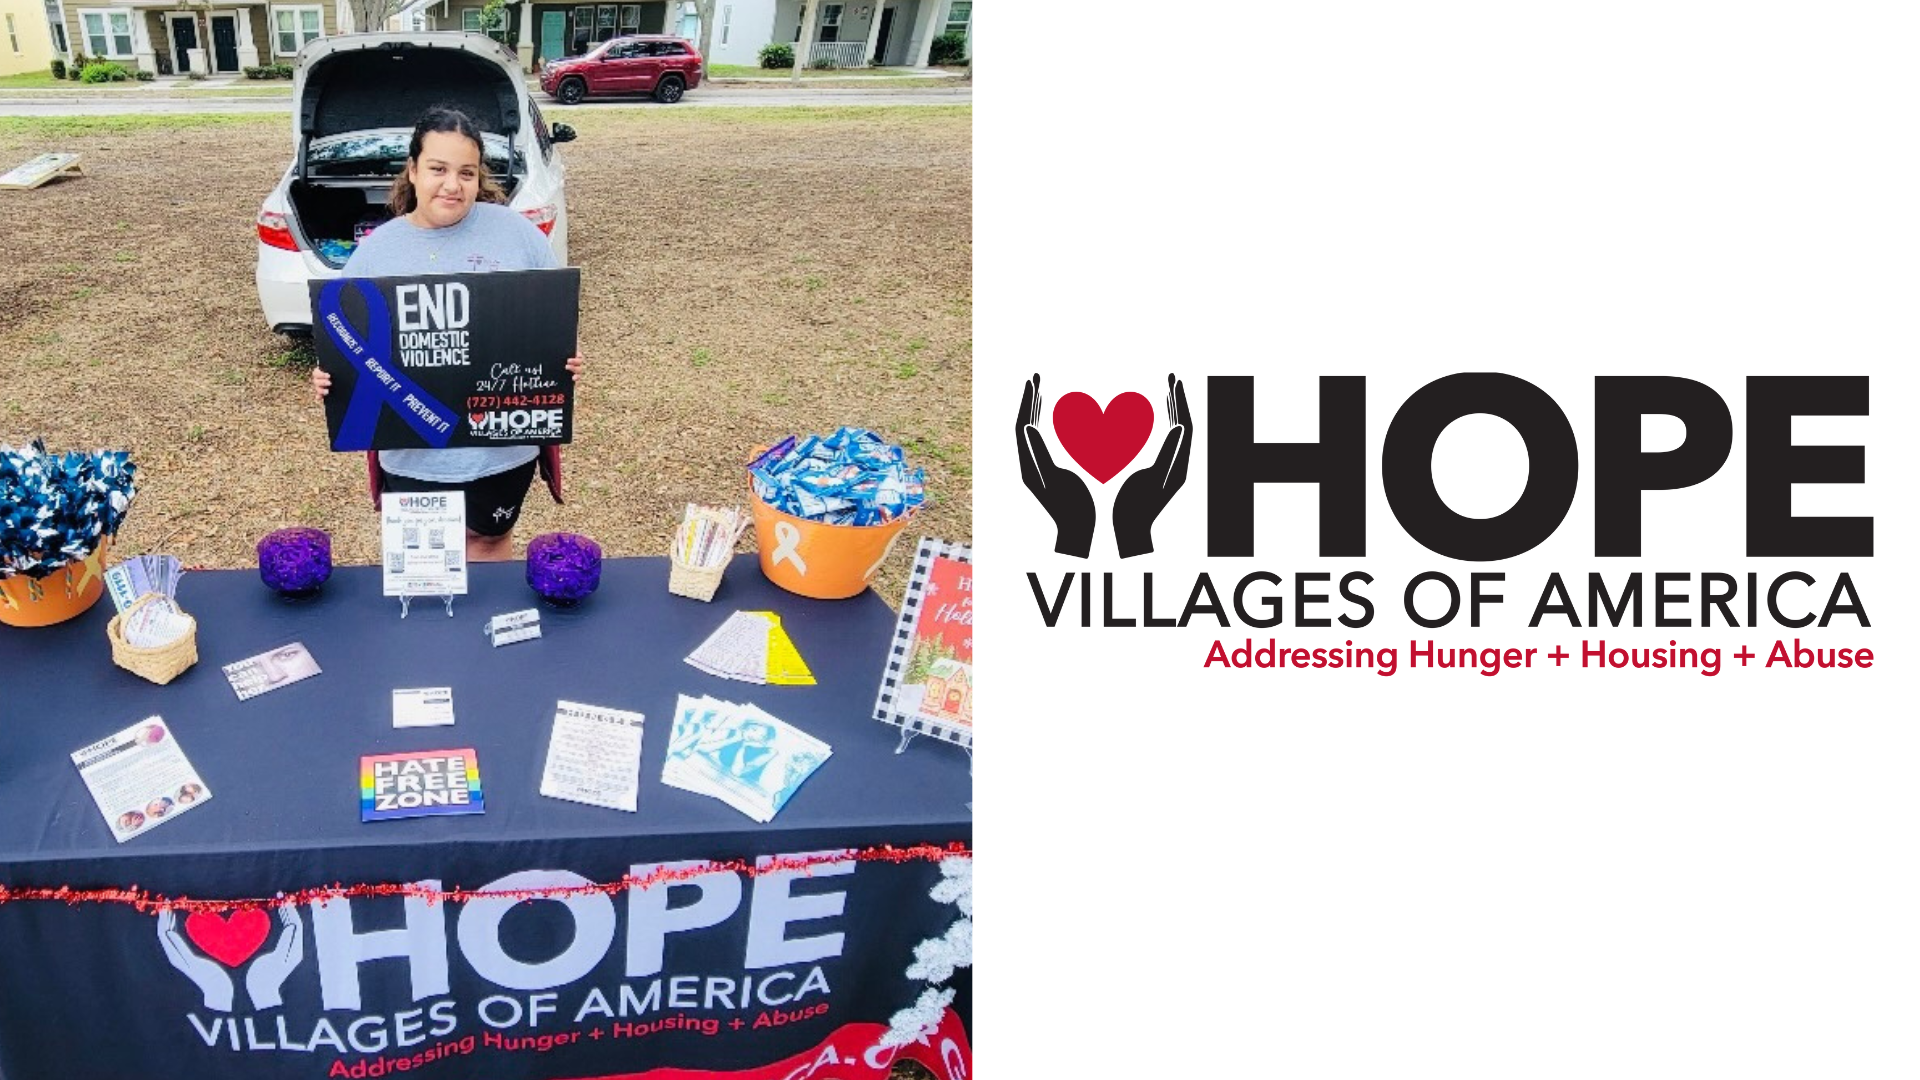 Hope Villages of America image and logo